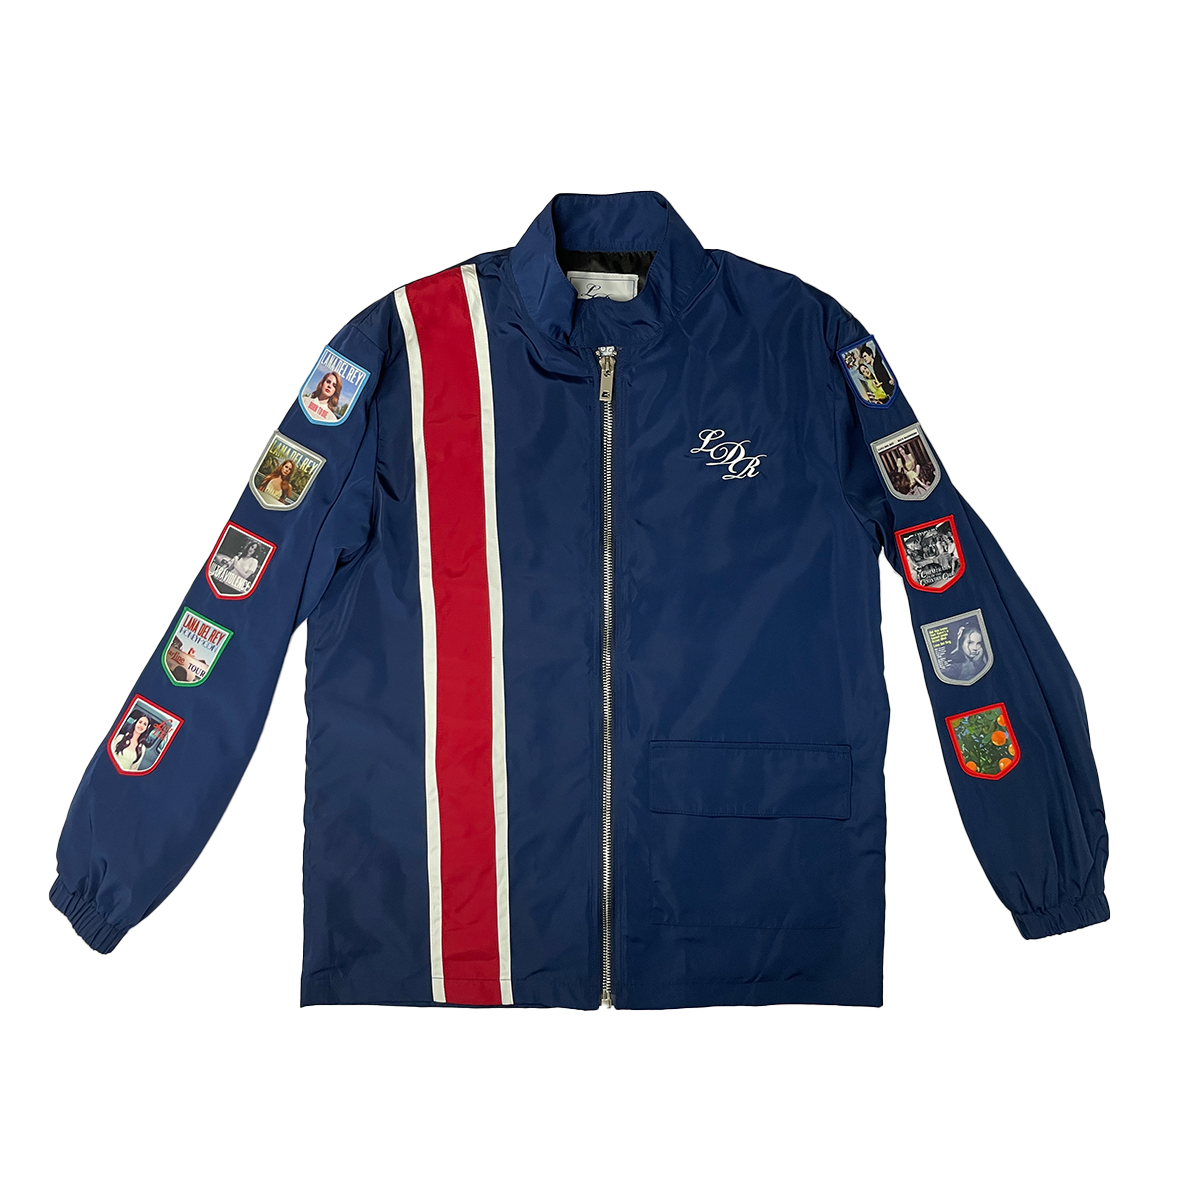 Lana Del Rey - Racing Jacket with Patches